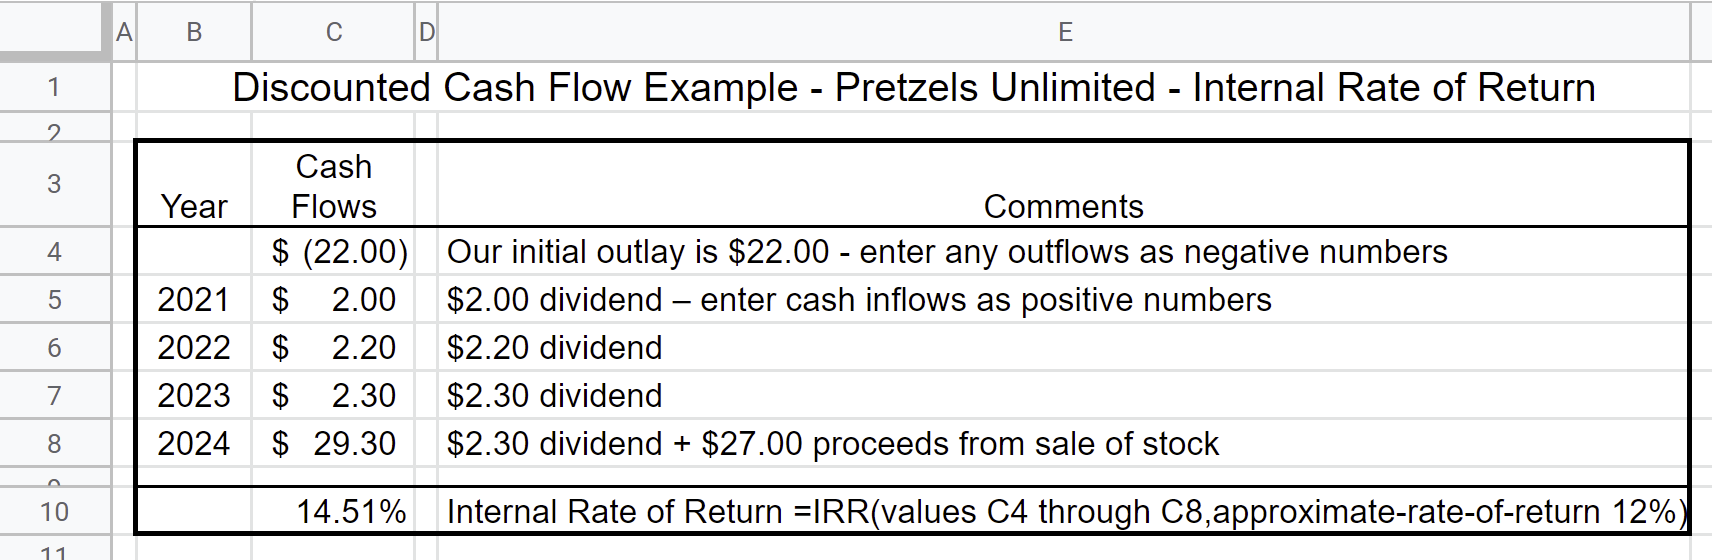 Electronic spreadsheet that will calculate the Internal Rate of Return (IRR) automatically